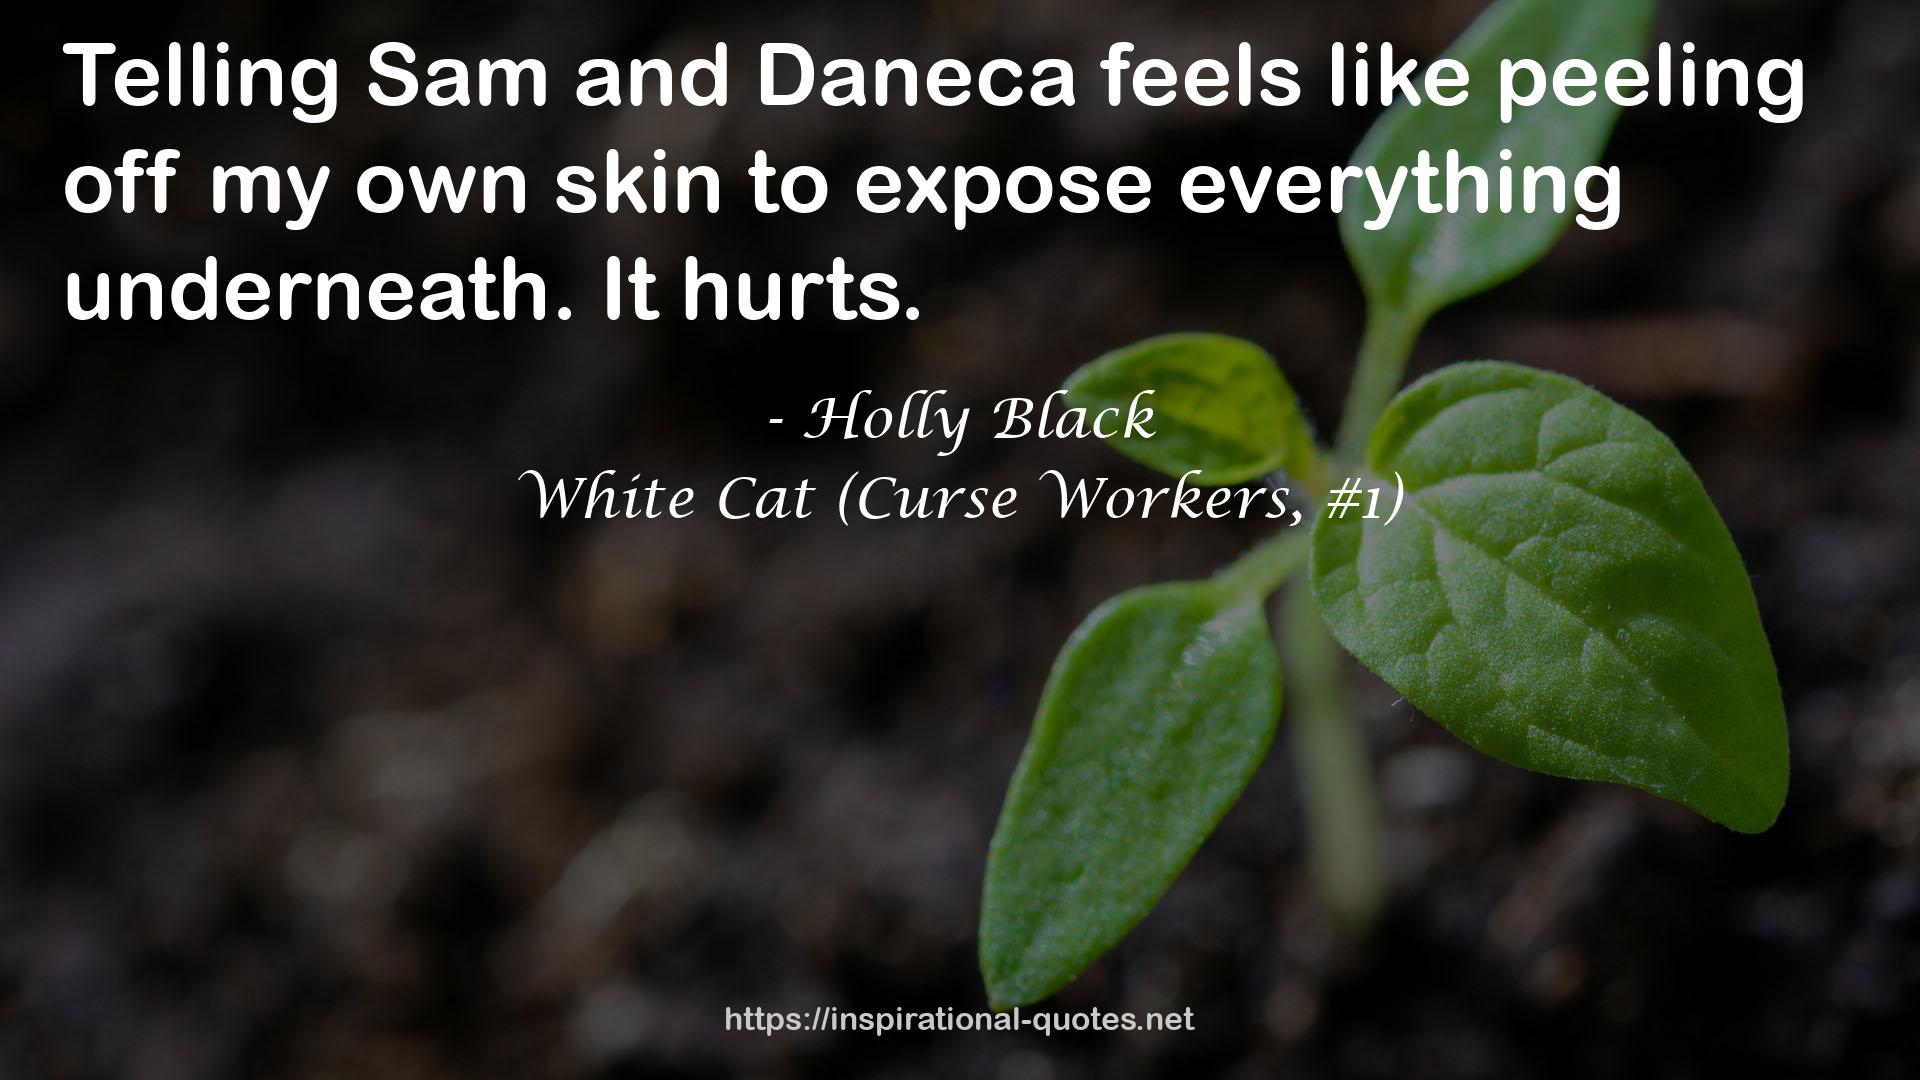 White Cat (Curse Workers, #1) QUOTES